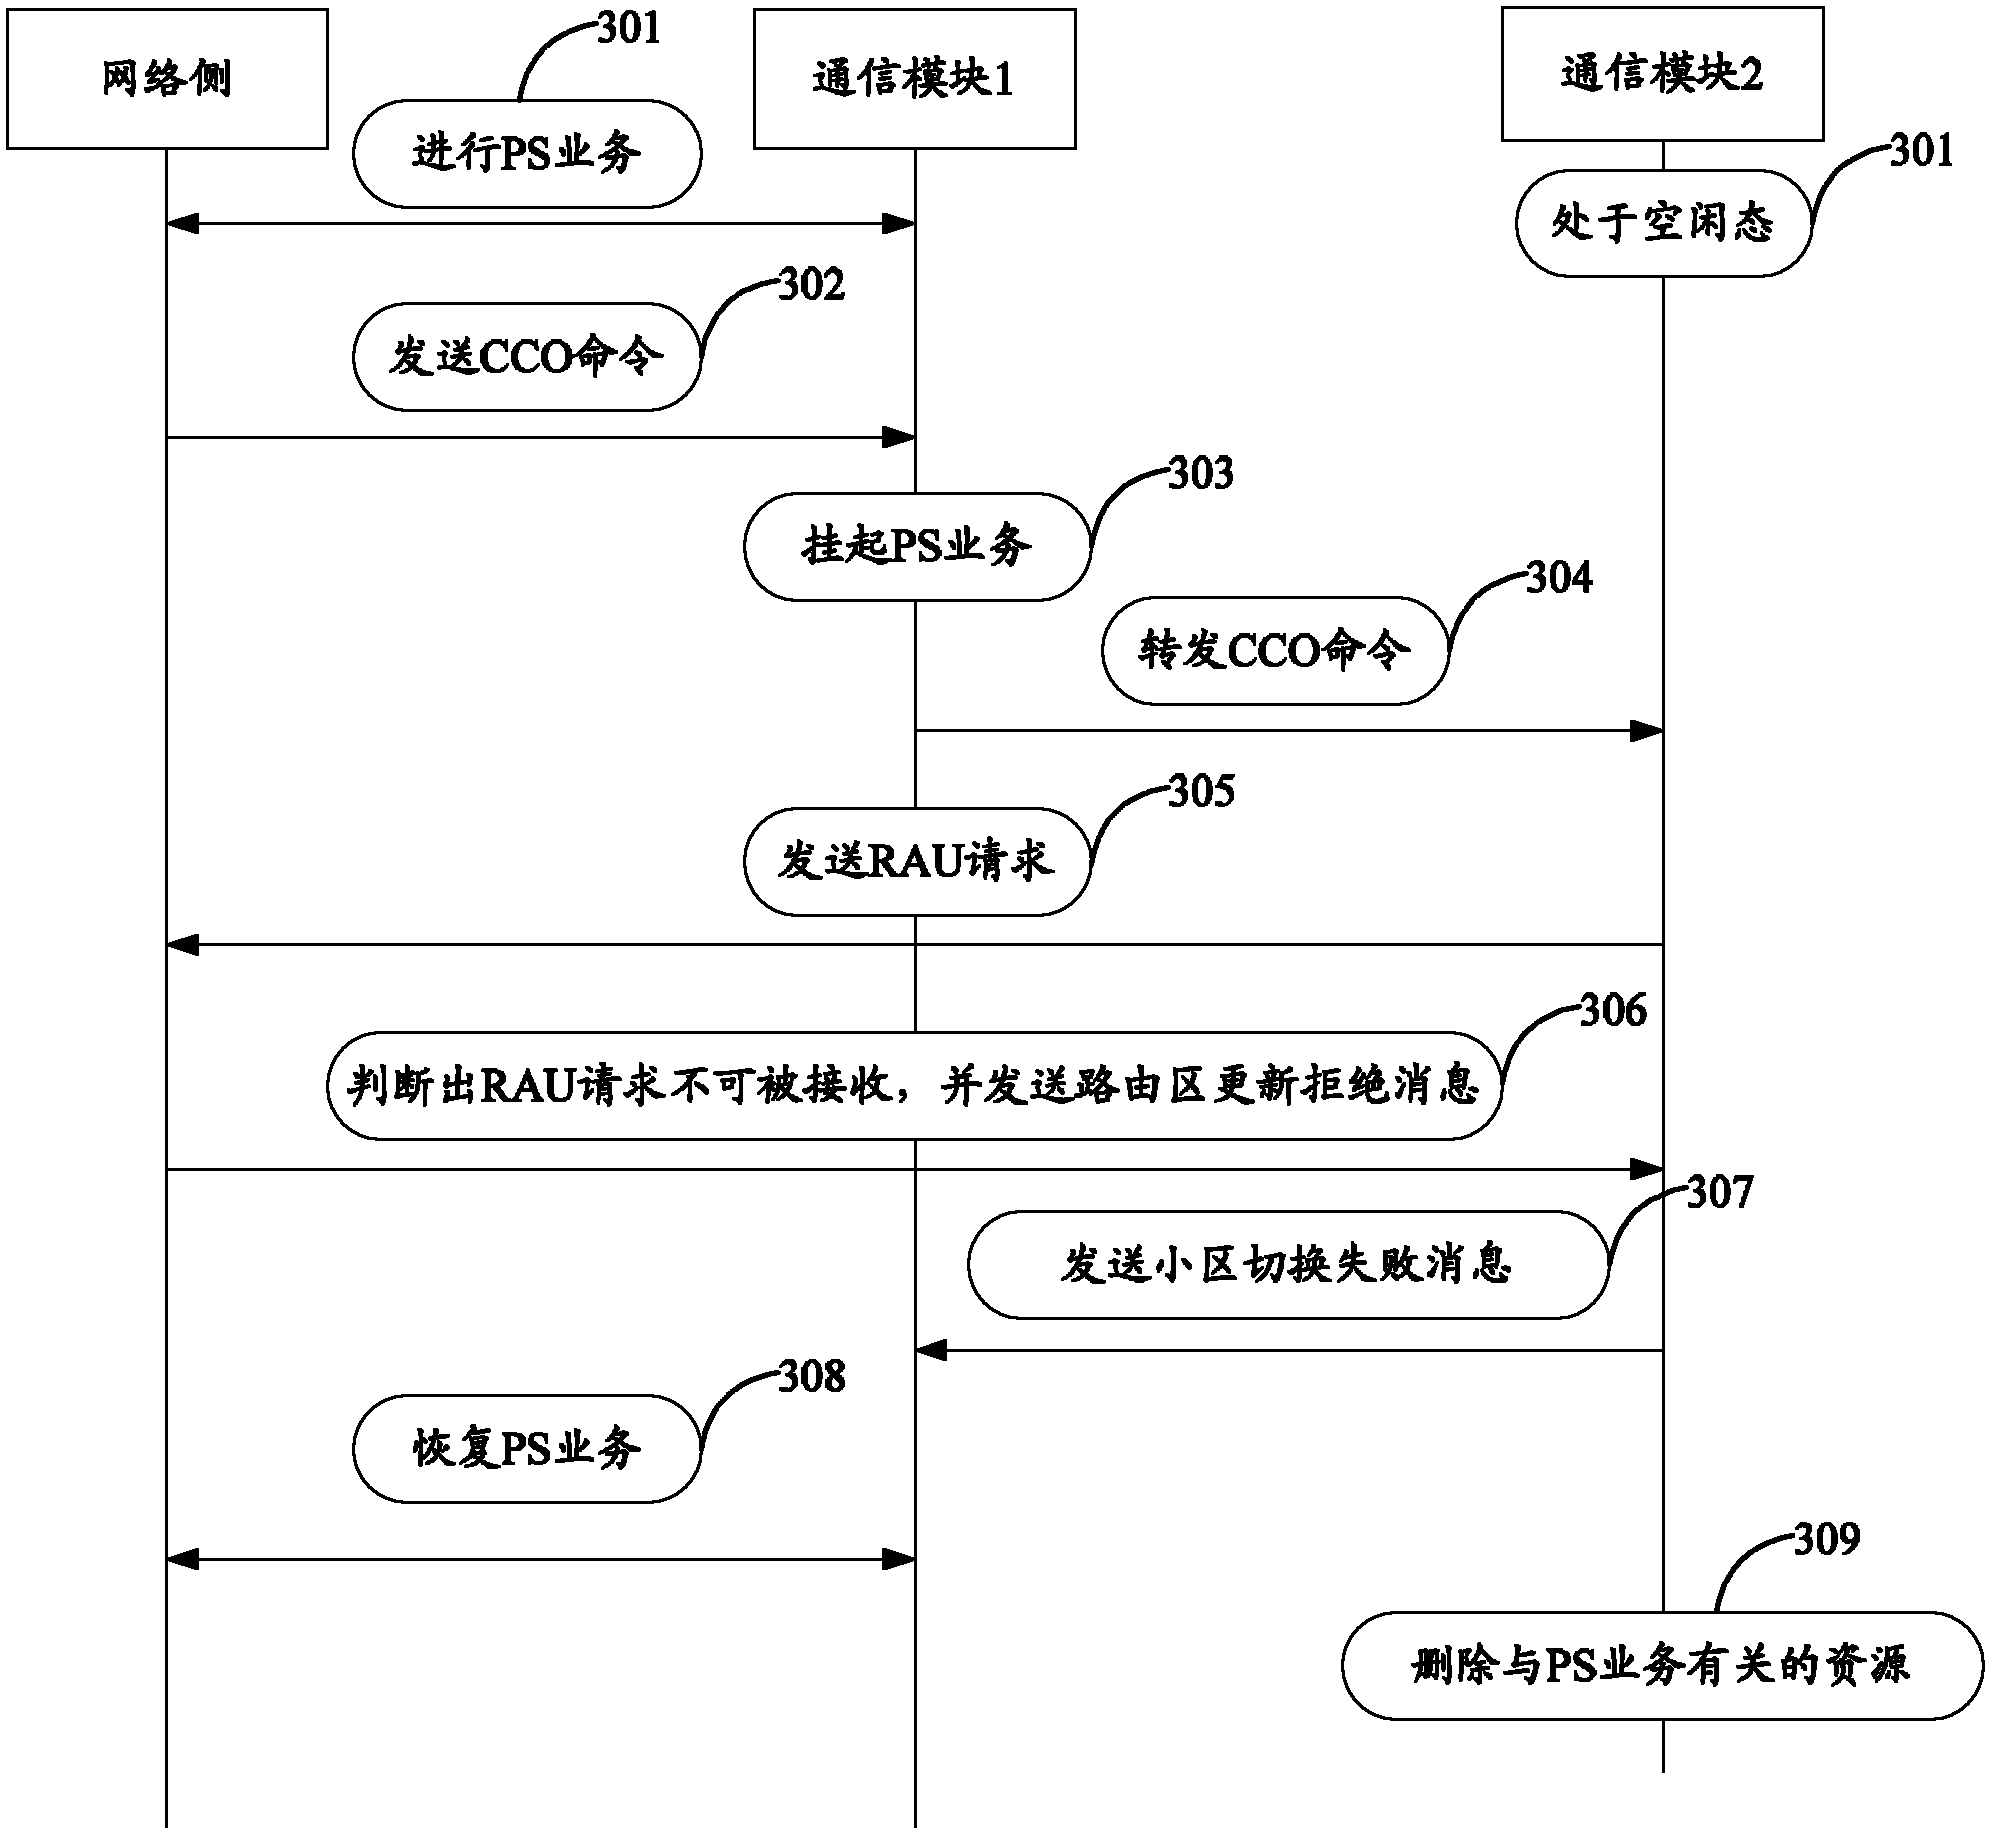 Method and terminal used for conversion among models